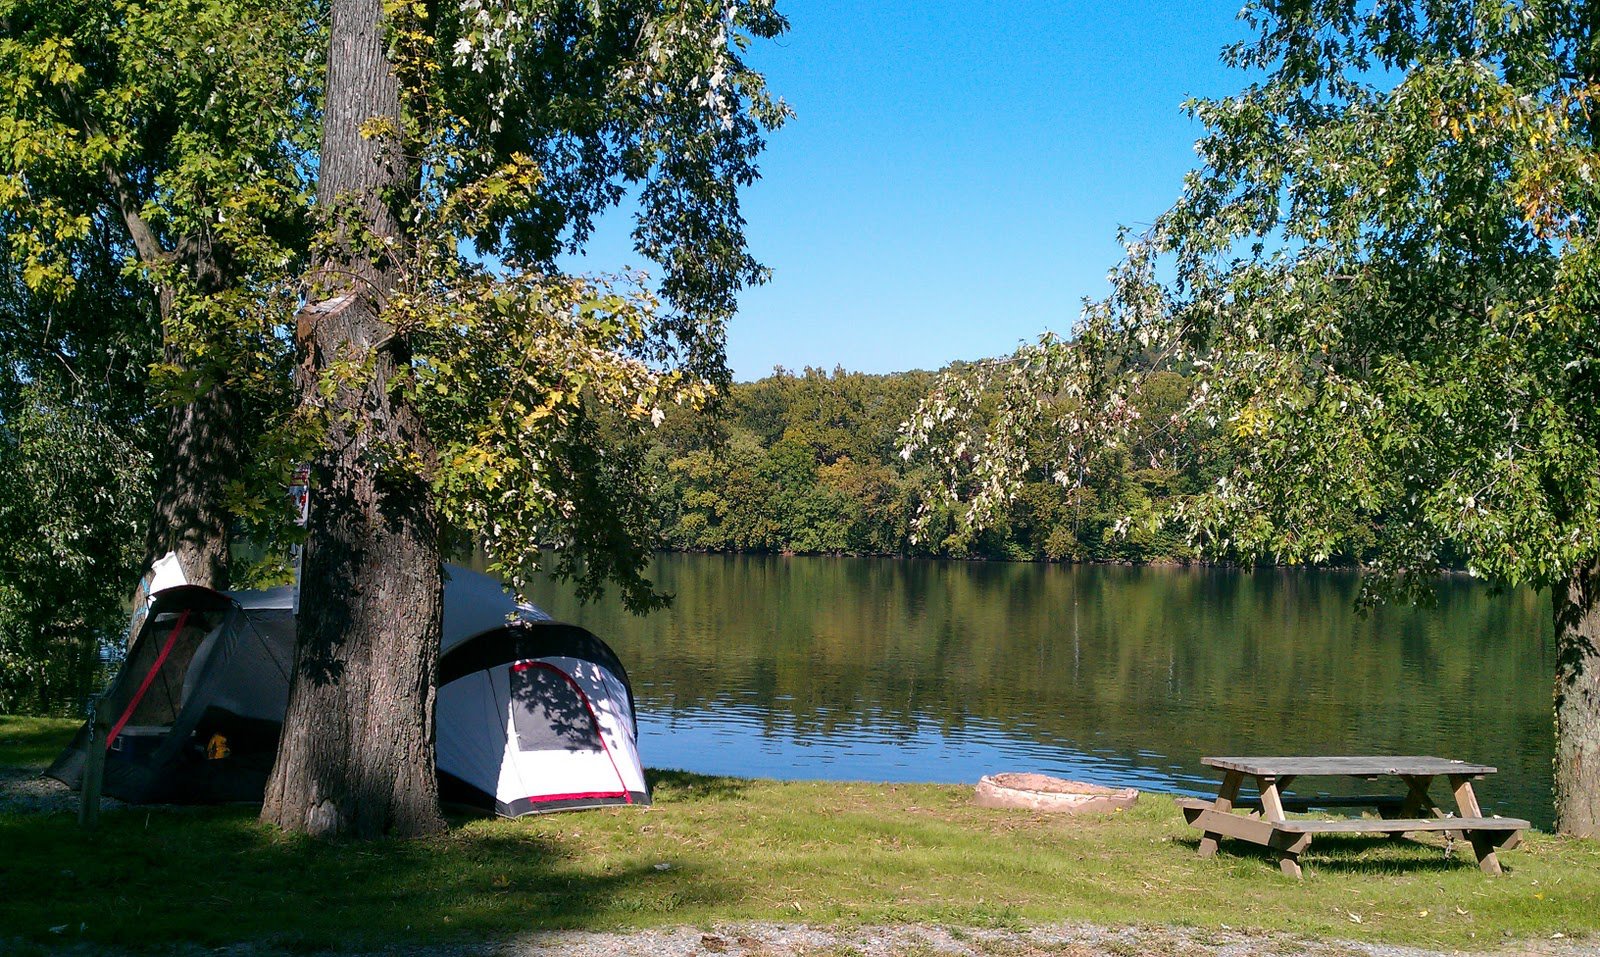 These 9 Amazing Camping Spots Around Washington DC Are An Absolute Must See...